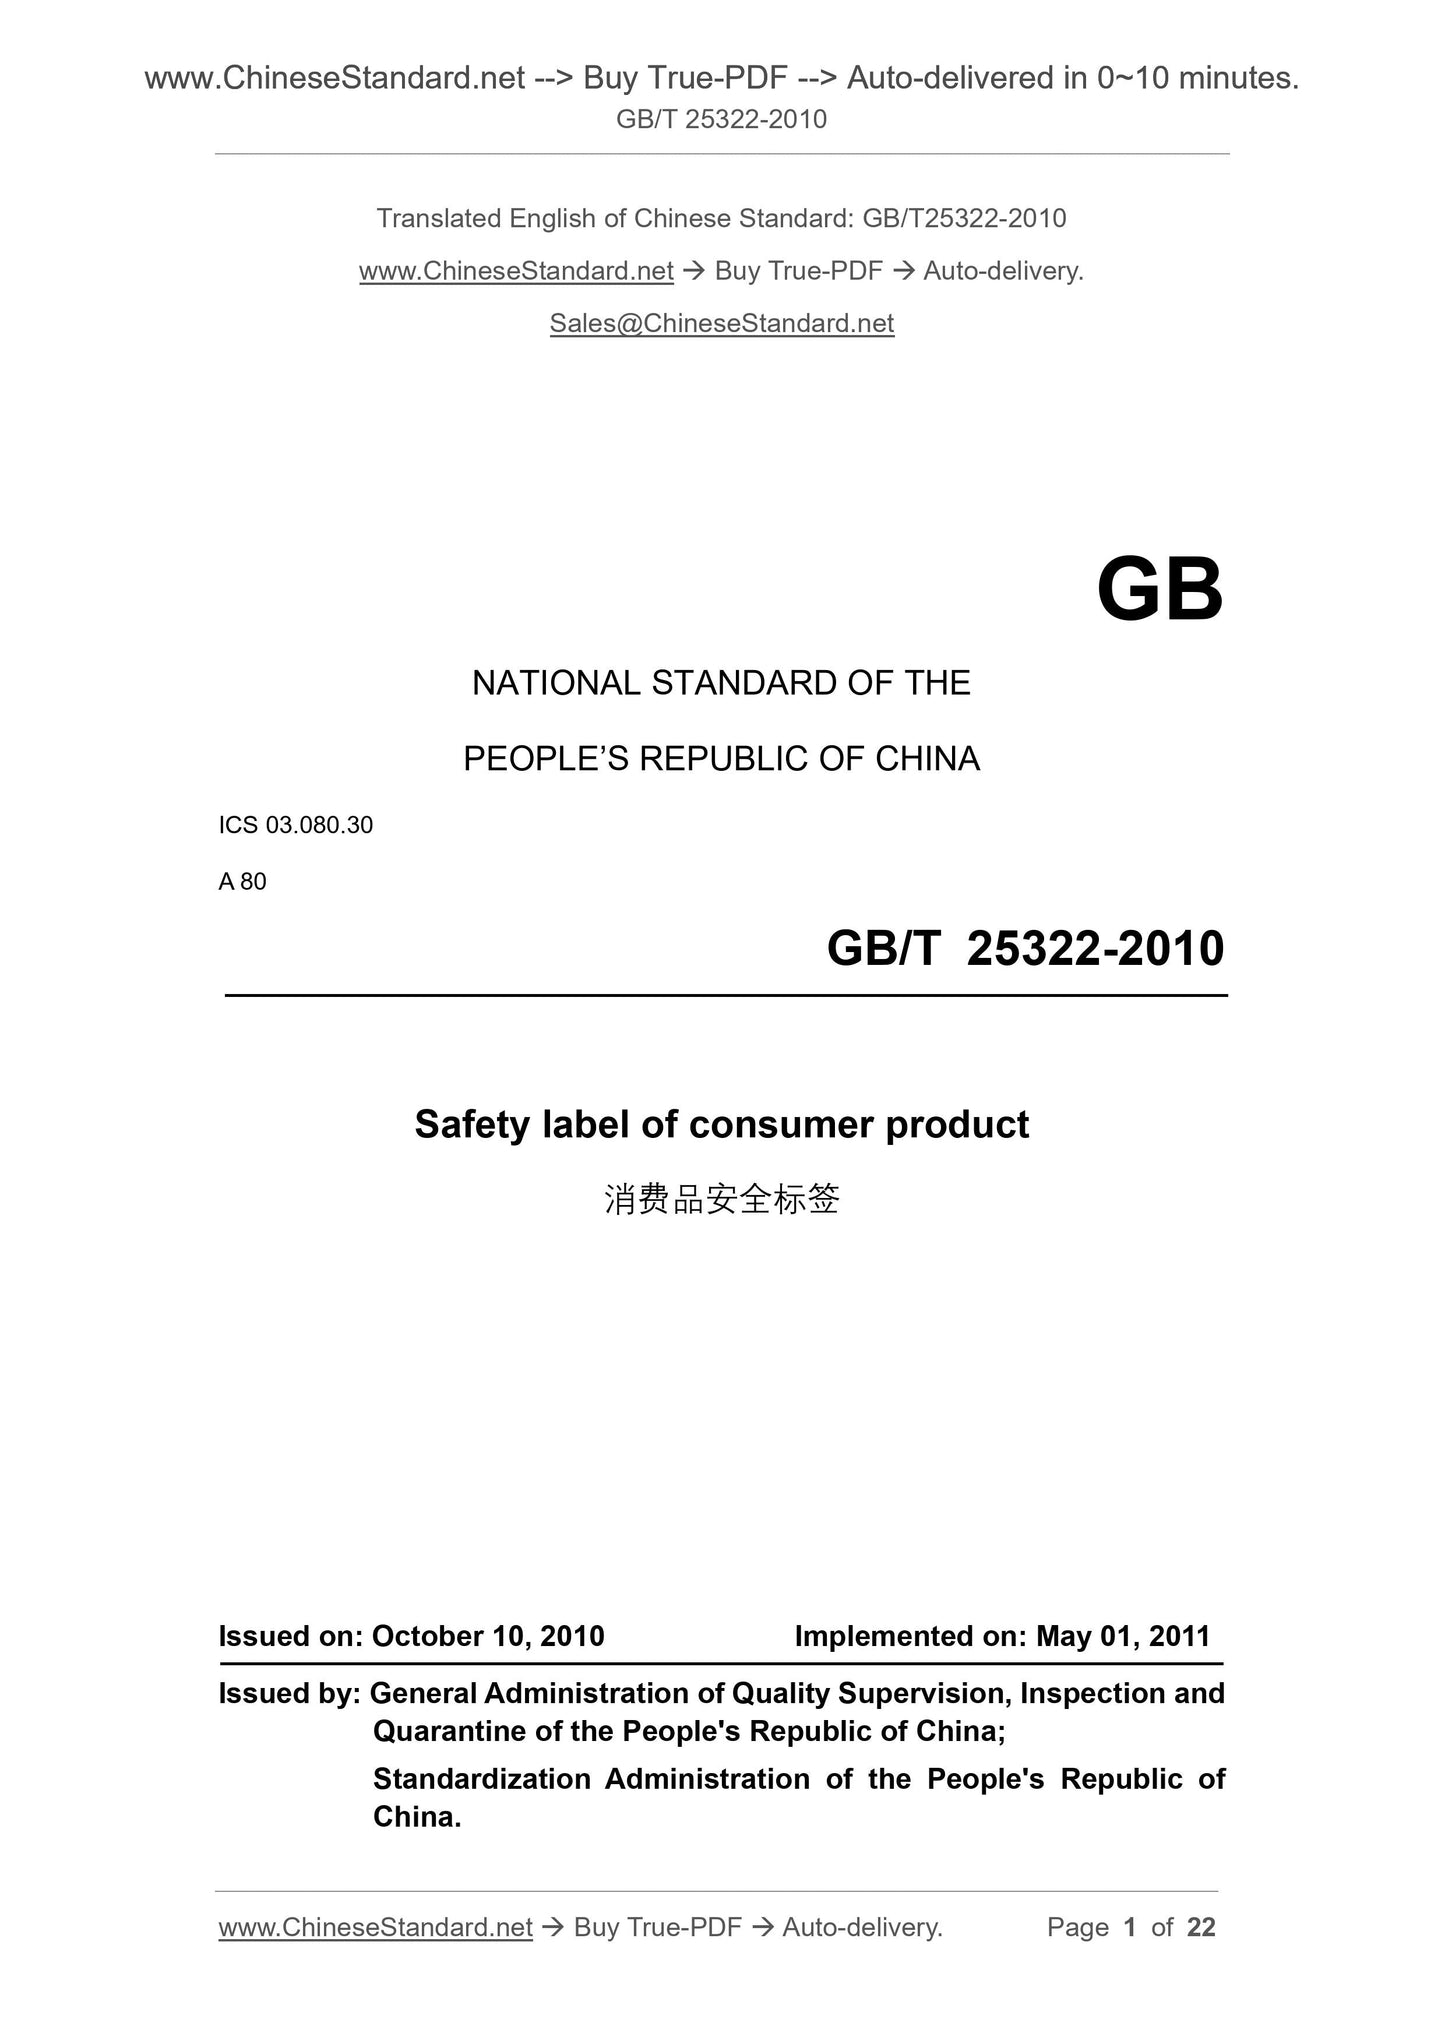 GB/T 25322-2010 Page 1